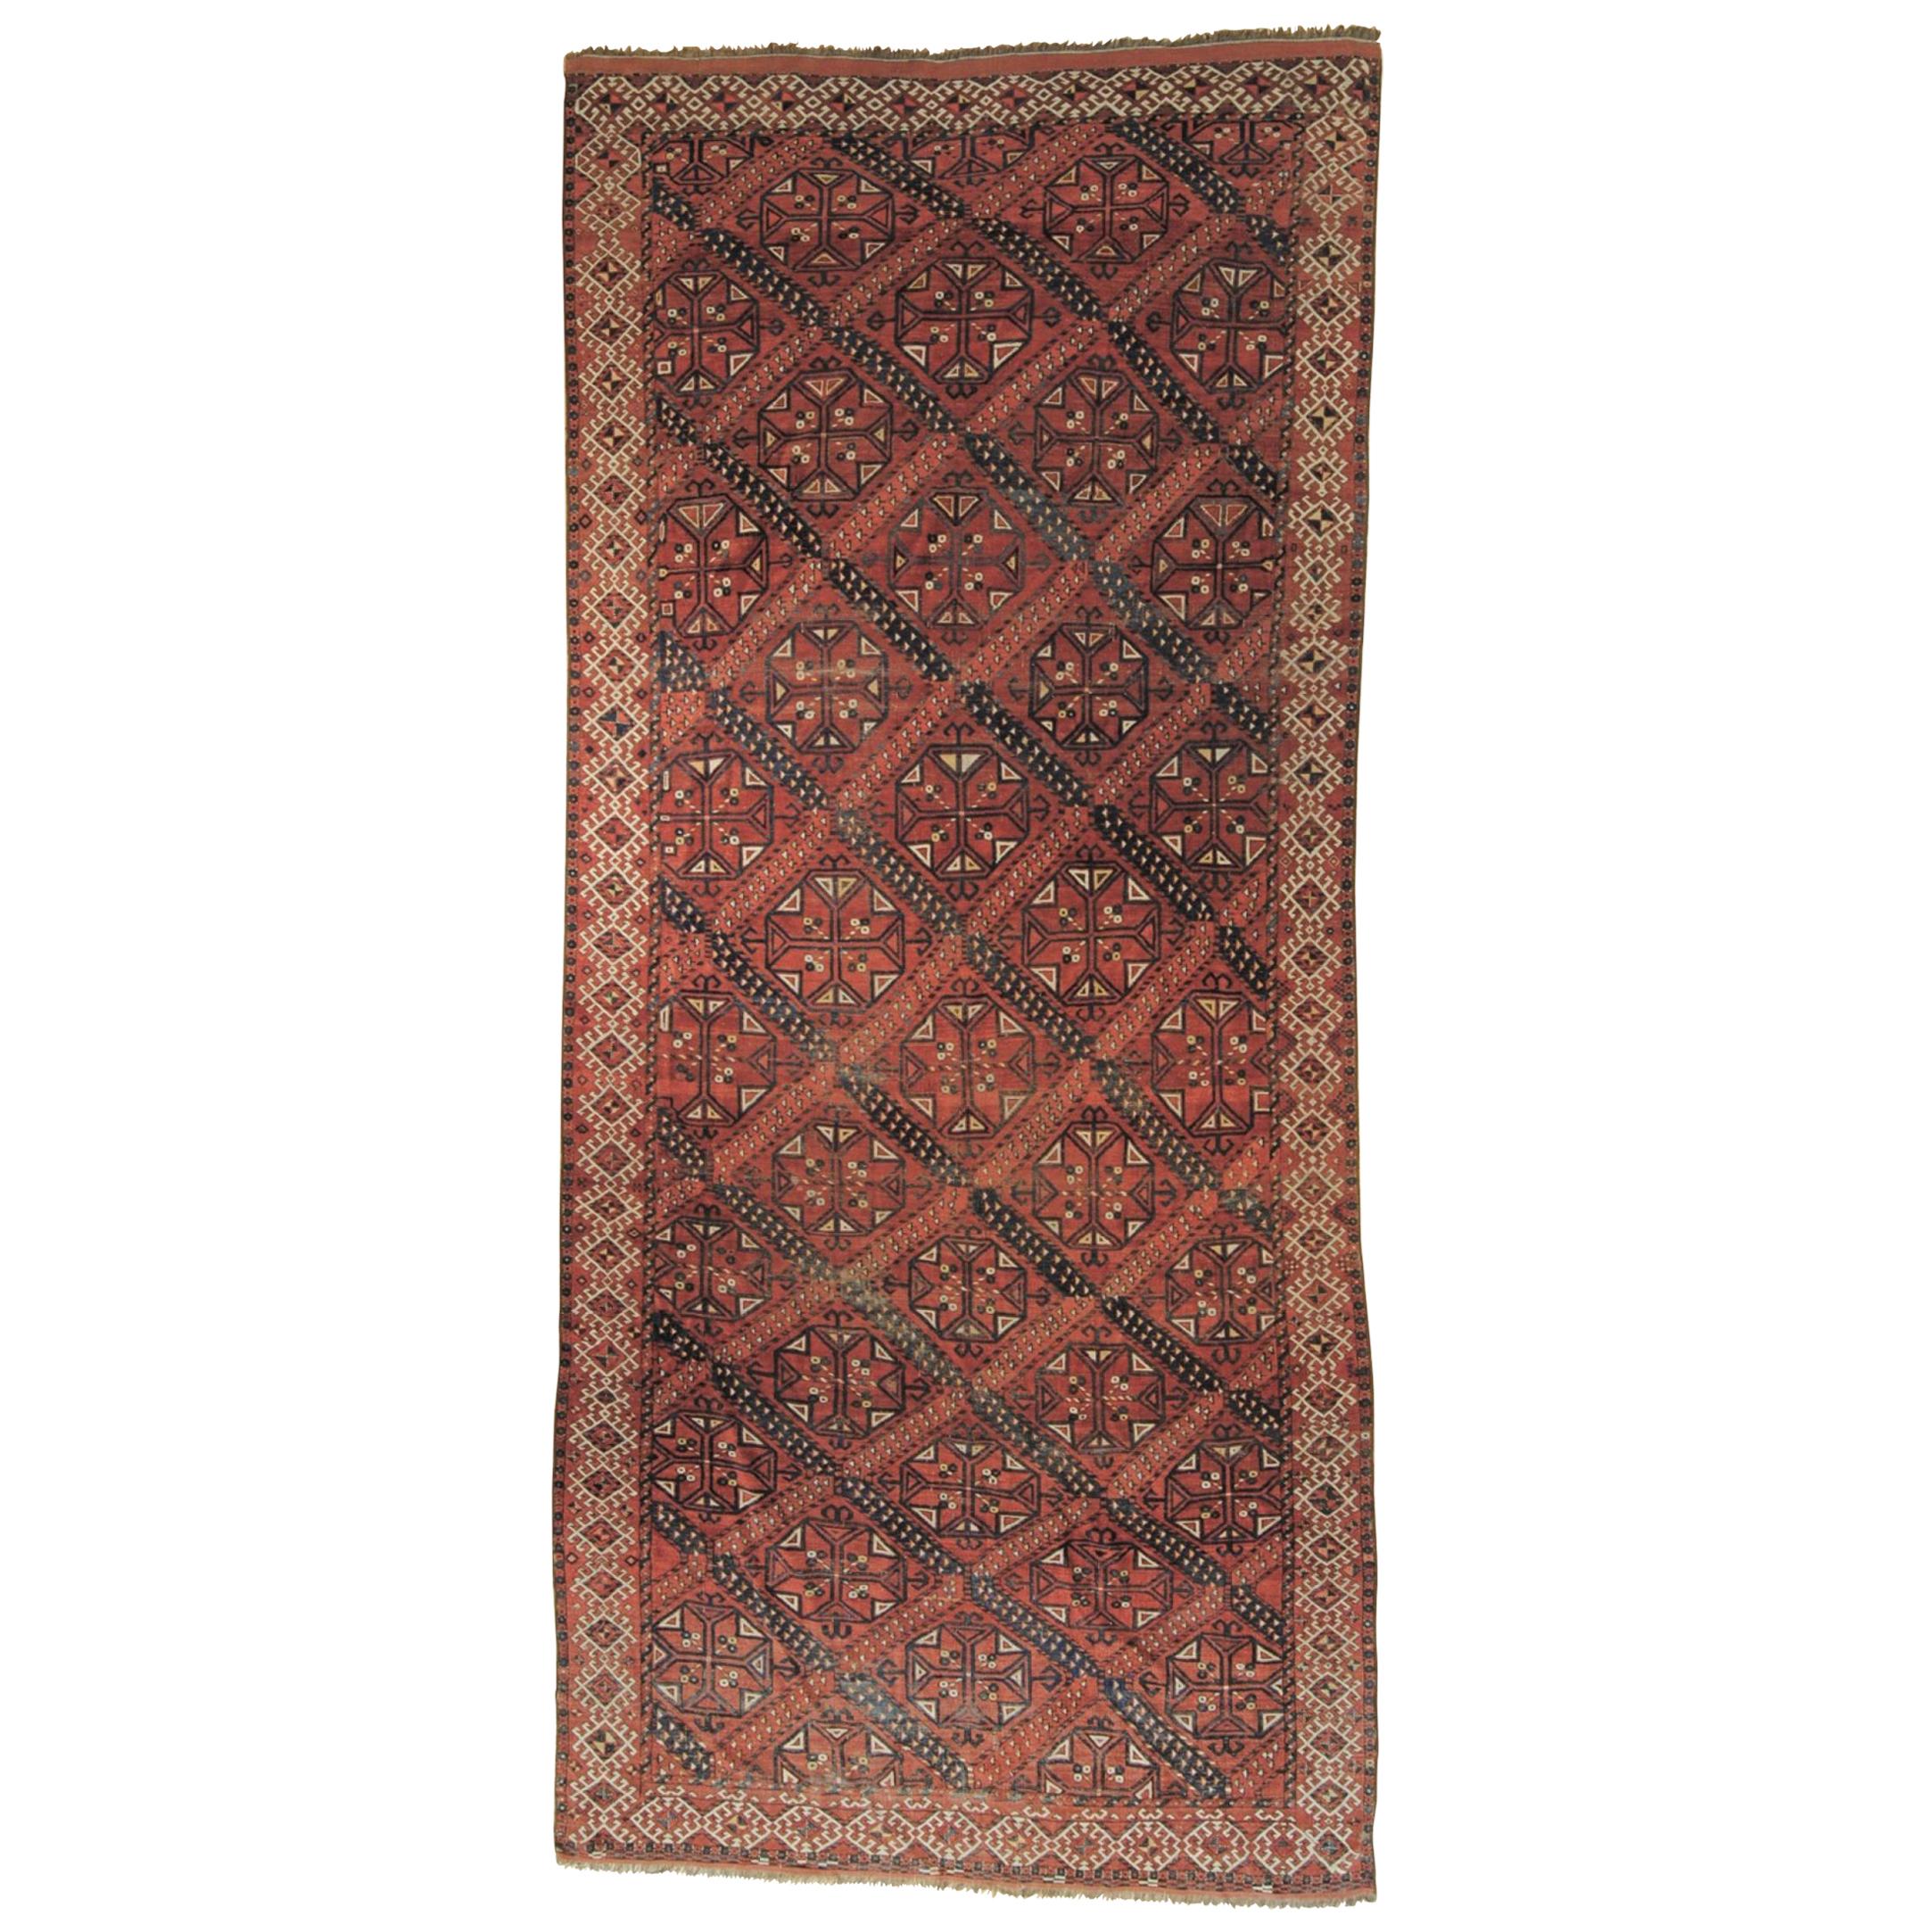 19th Century Red Blue White Geometric Archaic Polygonal Turkmen Rug, about 1870 For Sale